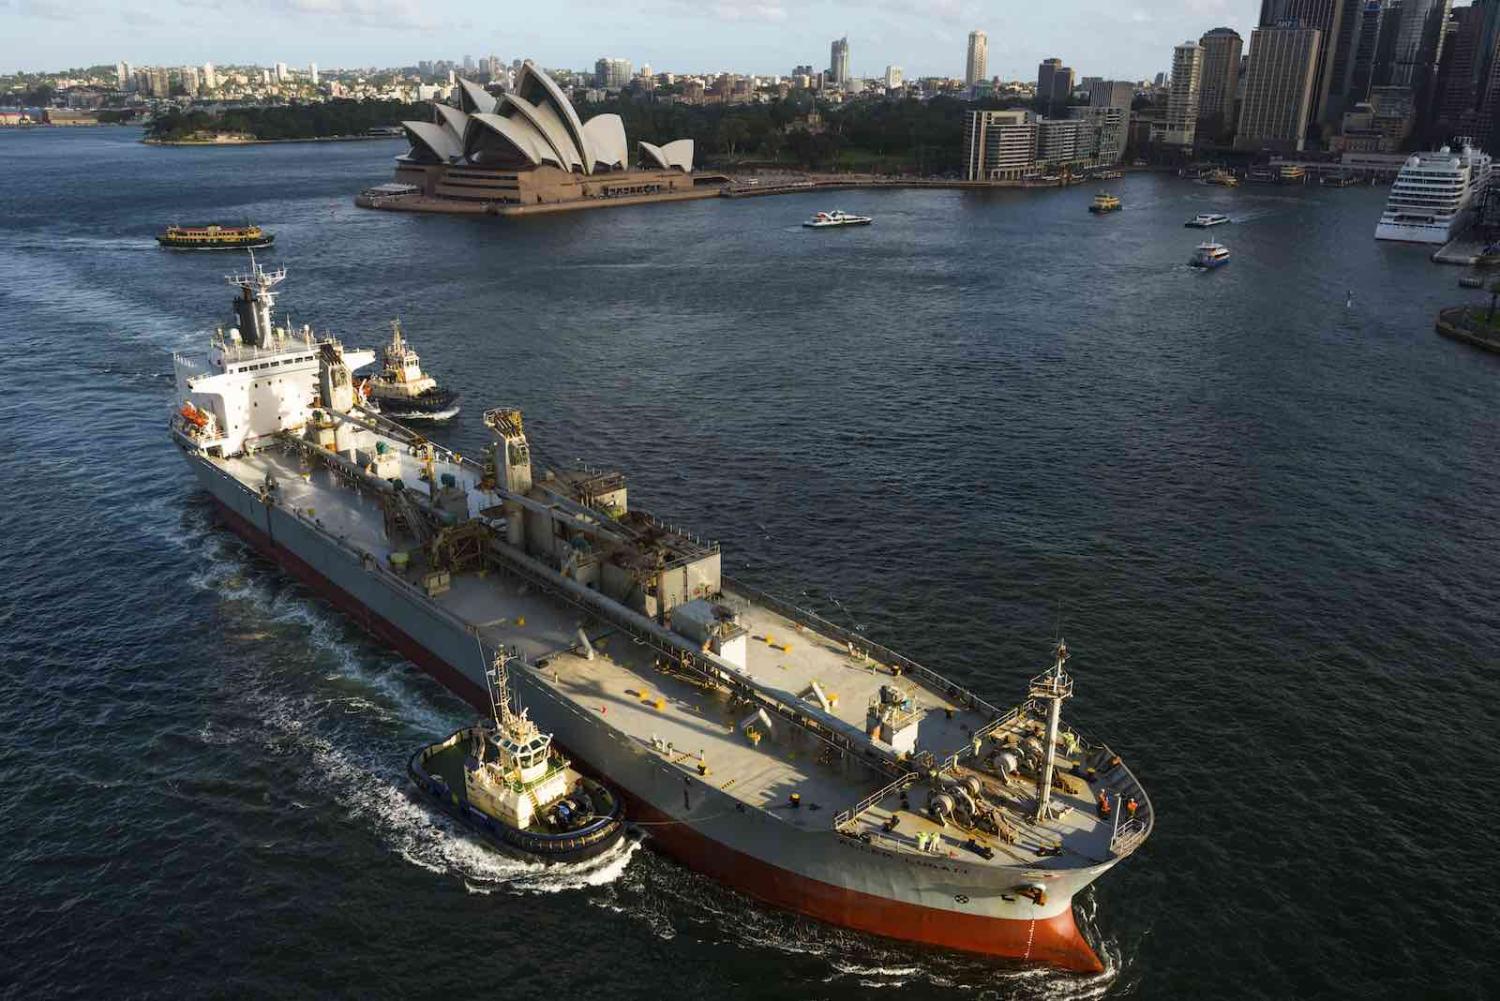 An oil tanker in Sydney Harbour, 2017 (Universal Images Group/Getty Images)